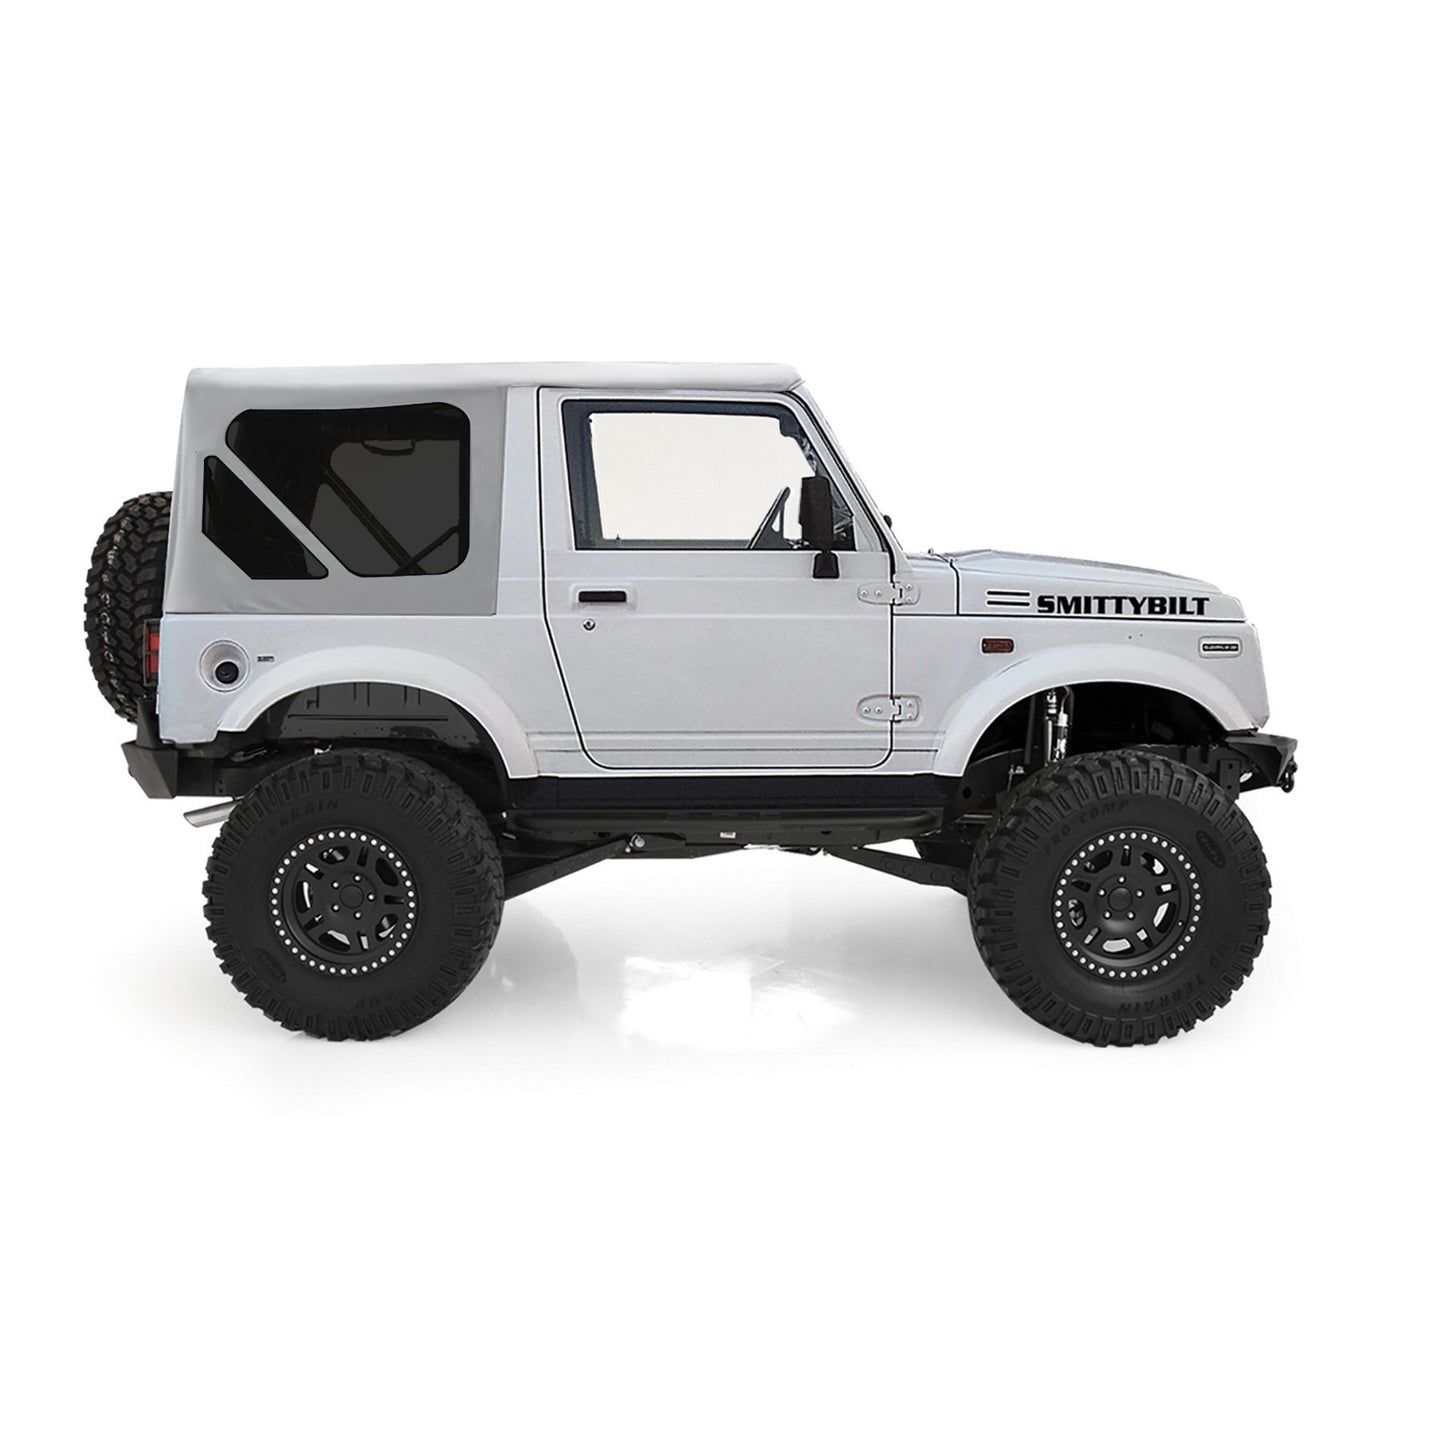 Smittybilt 98552 Oem Repl Soft Top White W/Zip Out Windows